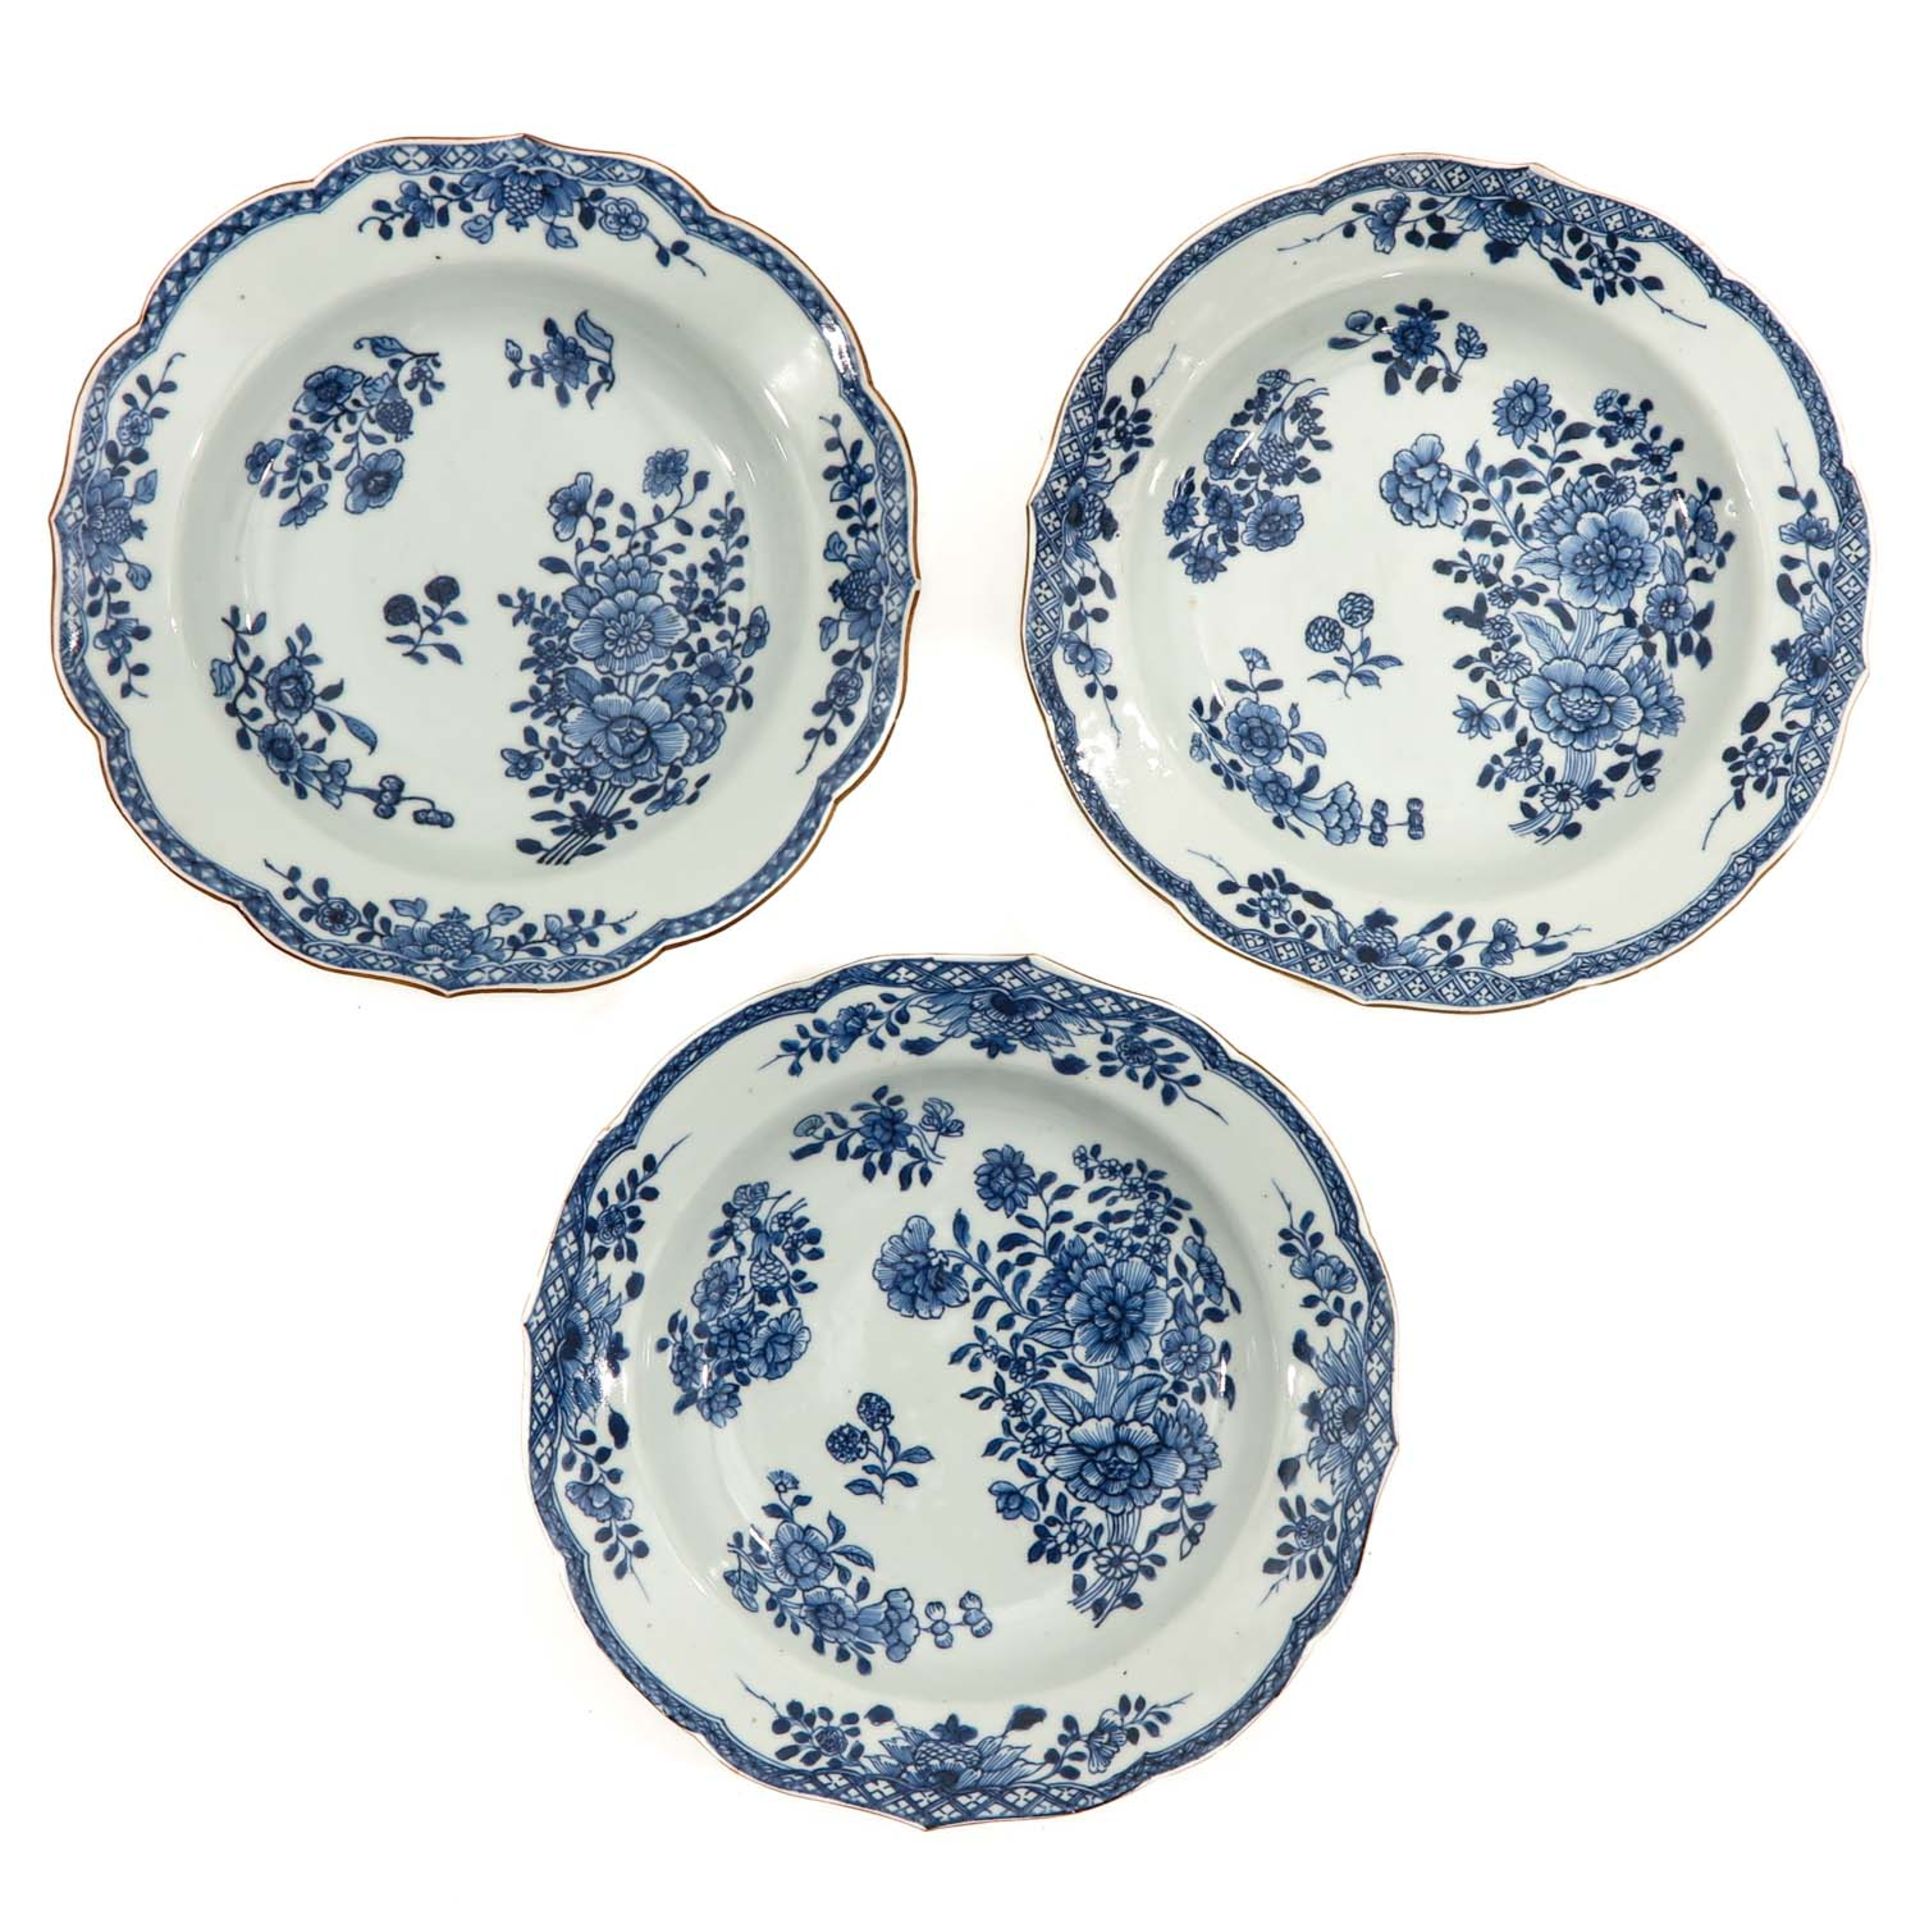 A Series of 9 Blue and White Plates - Bild 5 aus 10